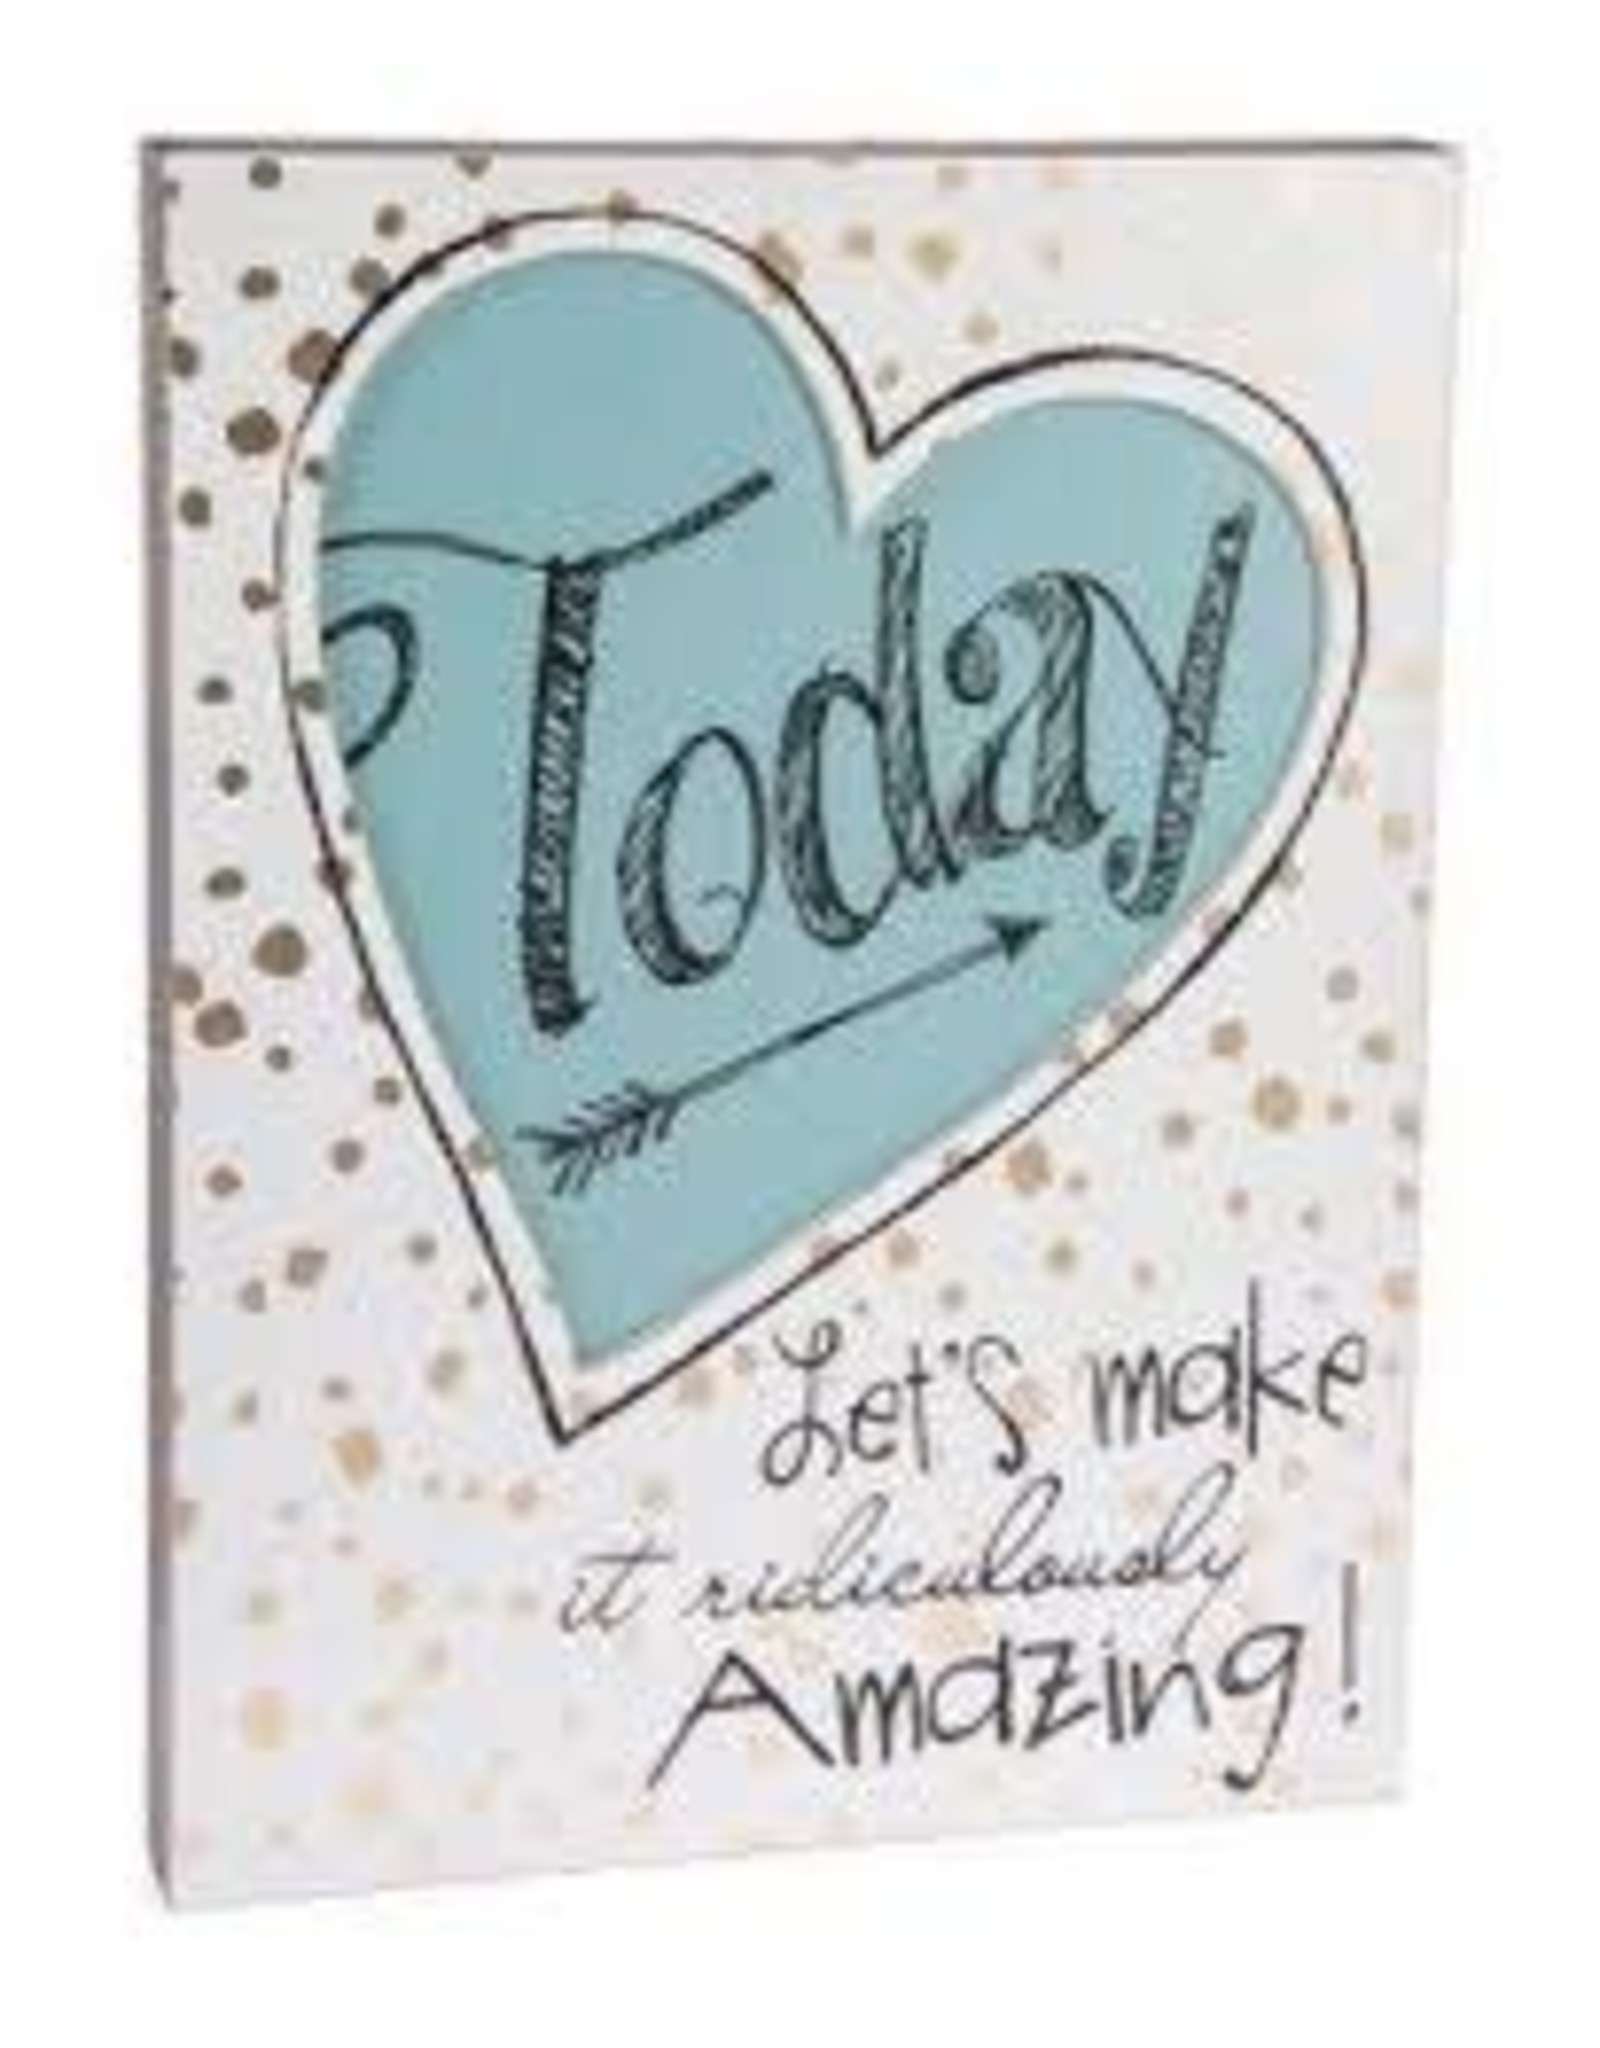 Ganz/Midwest*CBK Make Today Amazing Wall Sign